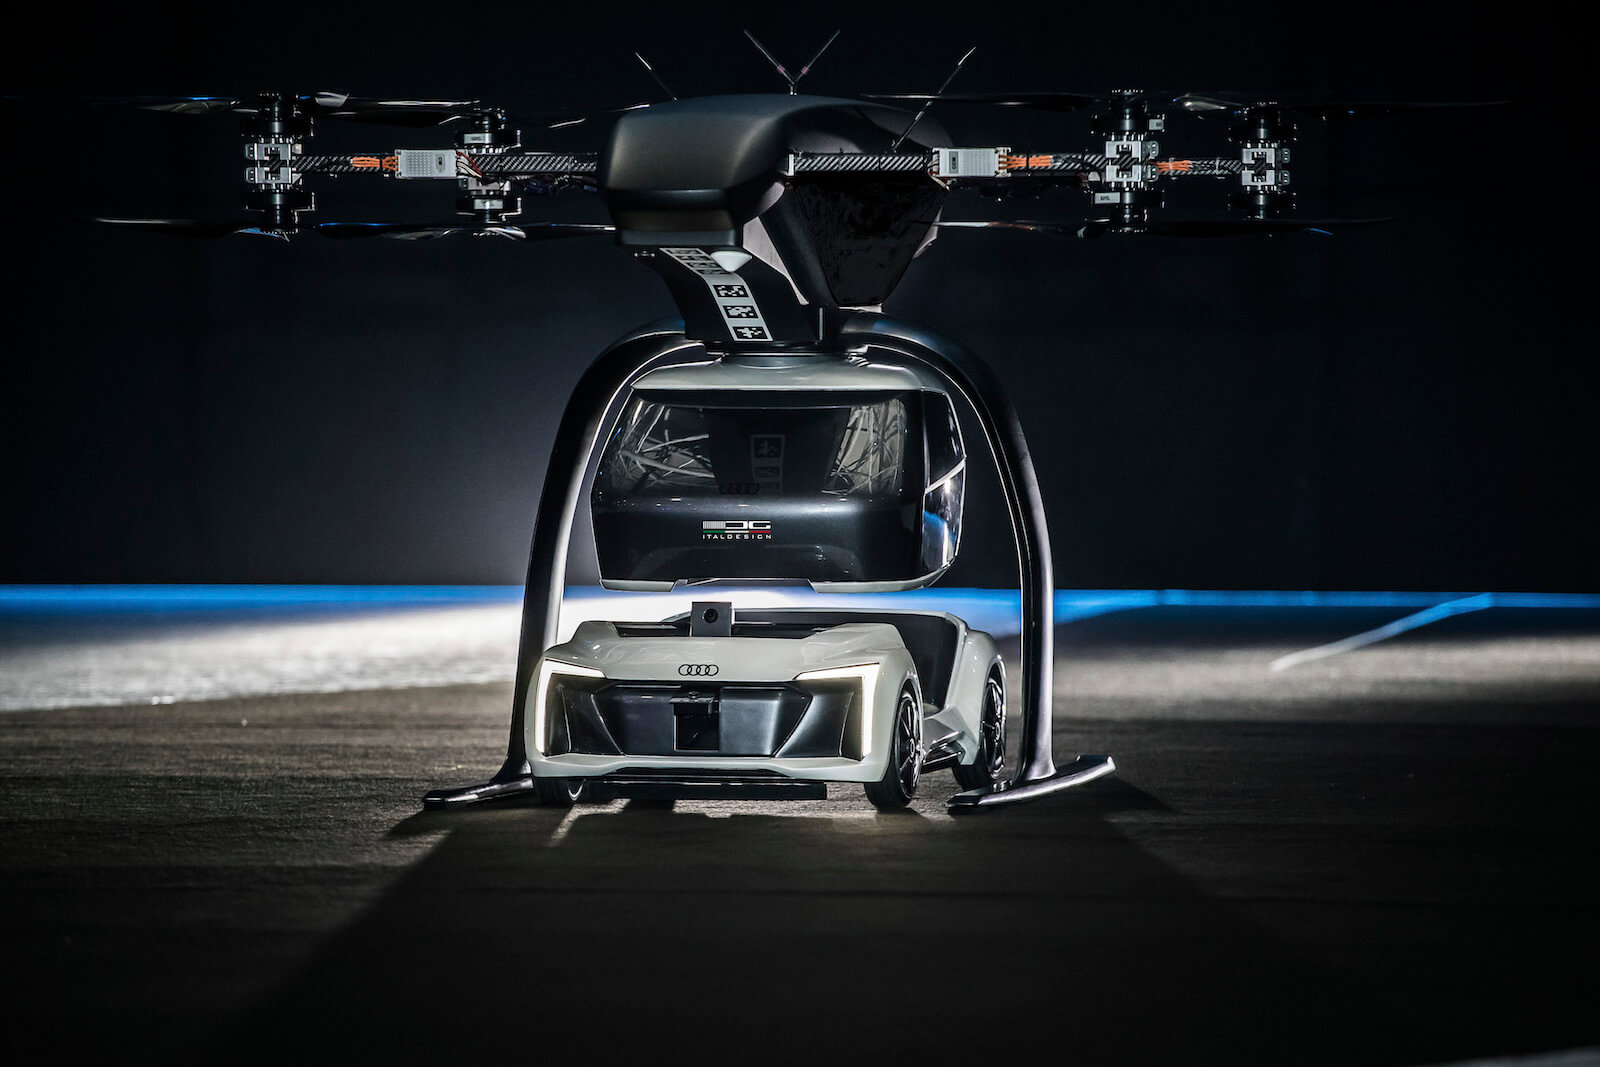 Pop.Up Next Flying taxi